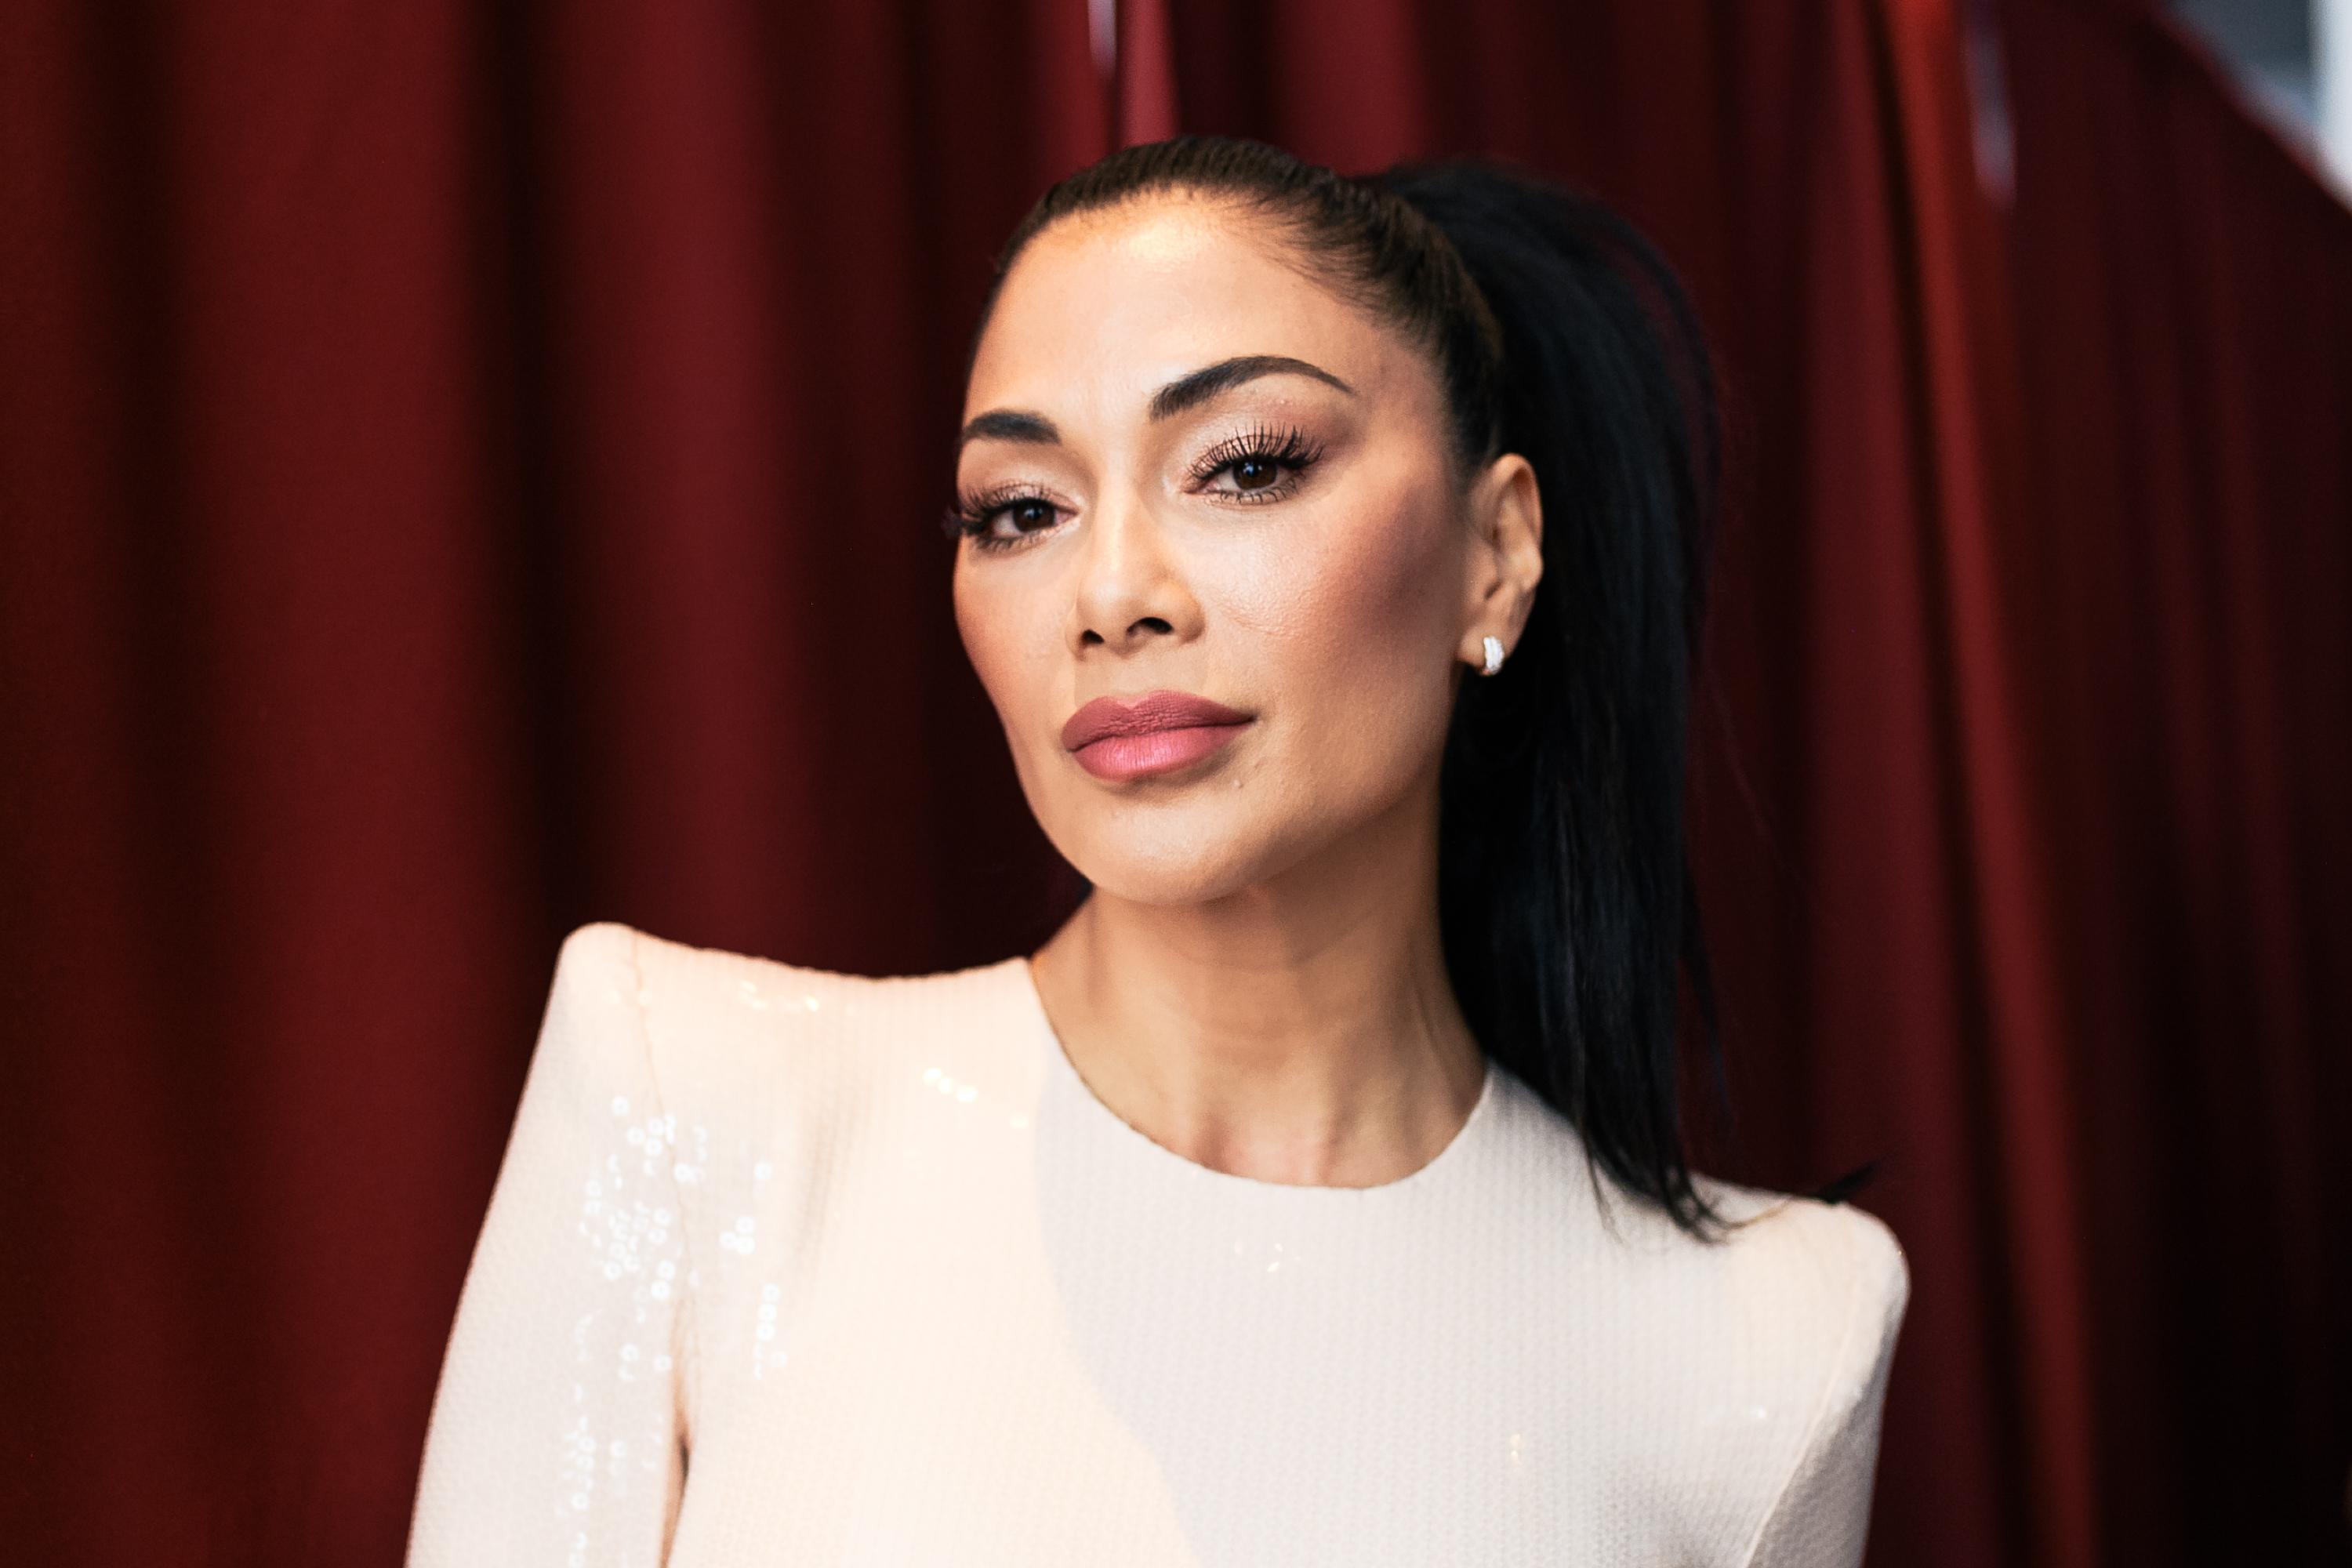 Nicole Scherzinger Has A Classy Response To Paula Abdul Mixing Her Up With Shakira Ahead Of The Halftime Show